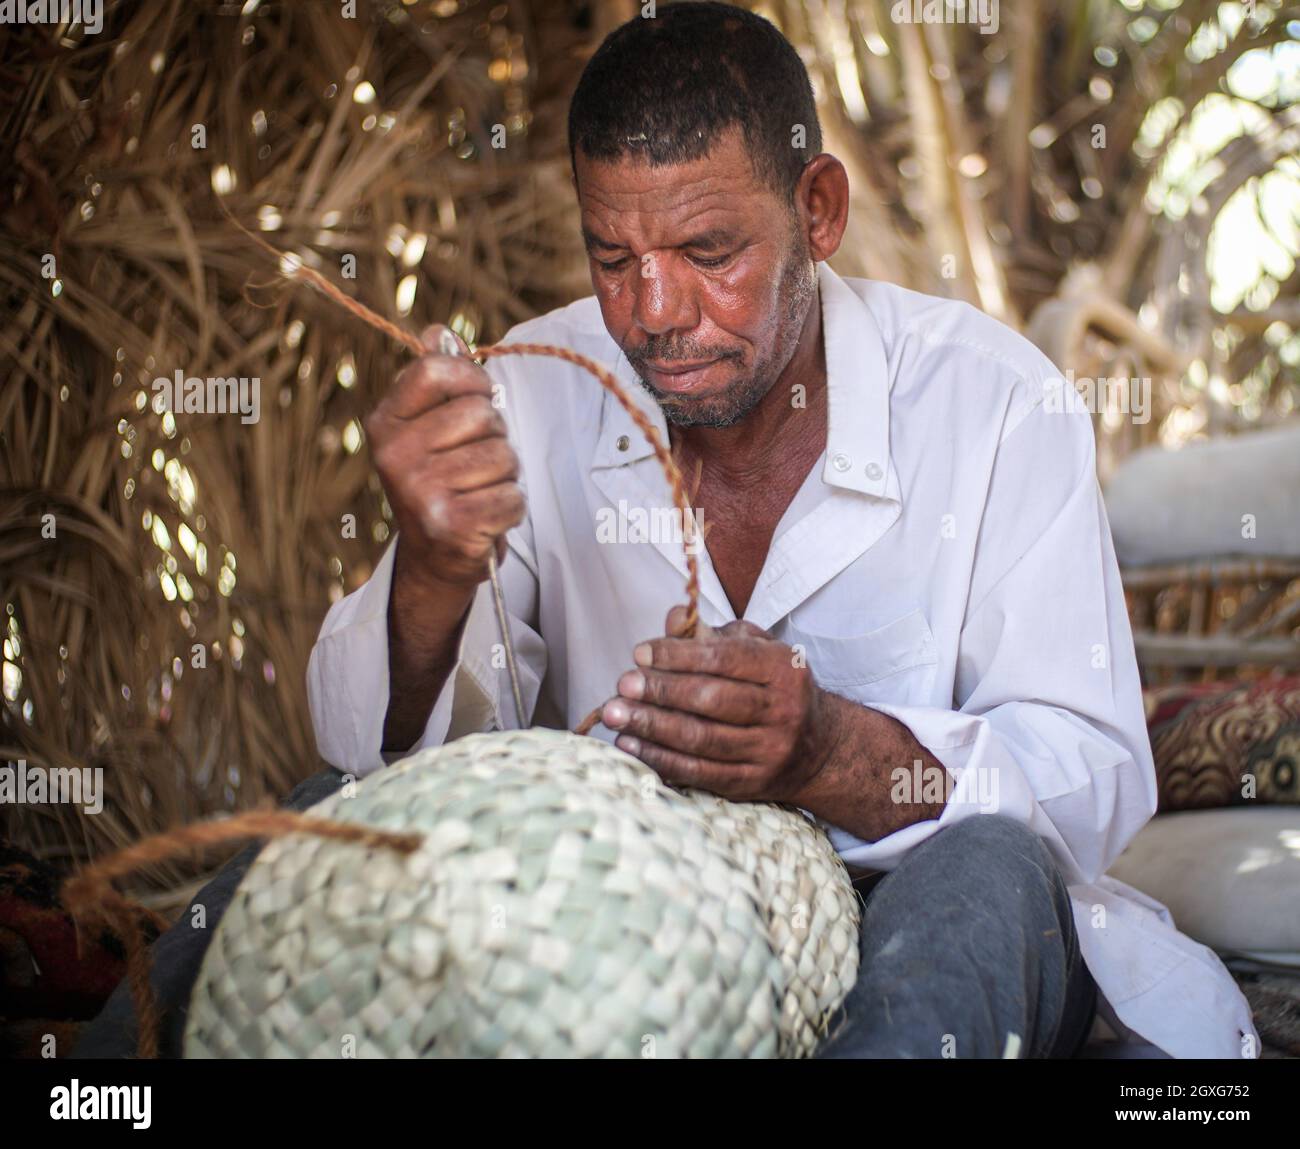 A Siwan man is weaving palm leaf into traditional bags and mat. The traditional straw plaited bags are still used widely in Siwa Oasis. Stock Photo